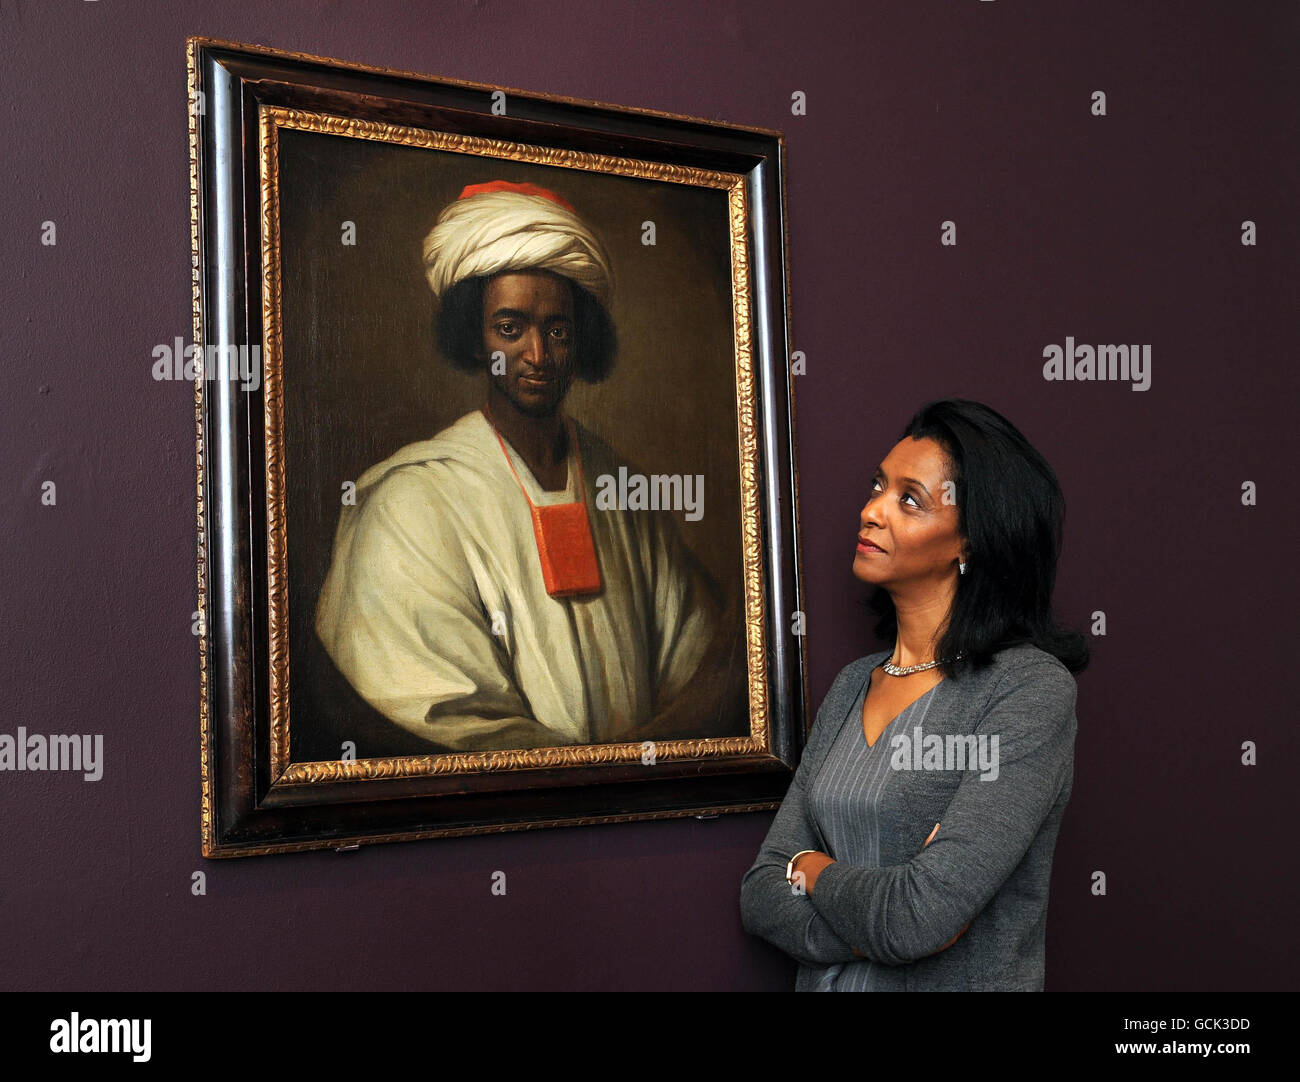 Broadcaster and National Portrait Gallery Trustee, Zeinab Badawi, with a portrait of Ayuba Suleiman Diallo (c. 1701-73) by William Hoare at the gallery, where an appeal was launched to purchase it from a private collection in order to save it for the nation for an additional 100,000. The richly historic portrait would be the first known British oil painting of a freed slave. Stock Photo